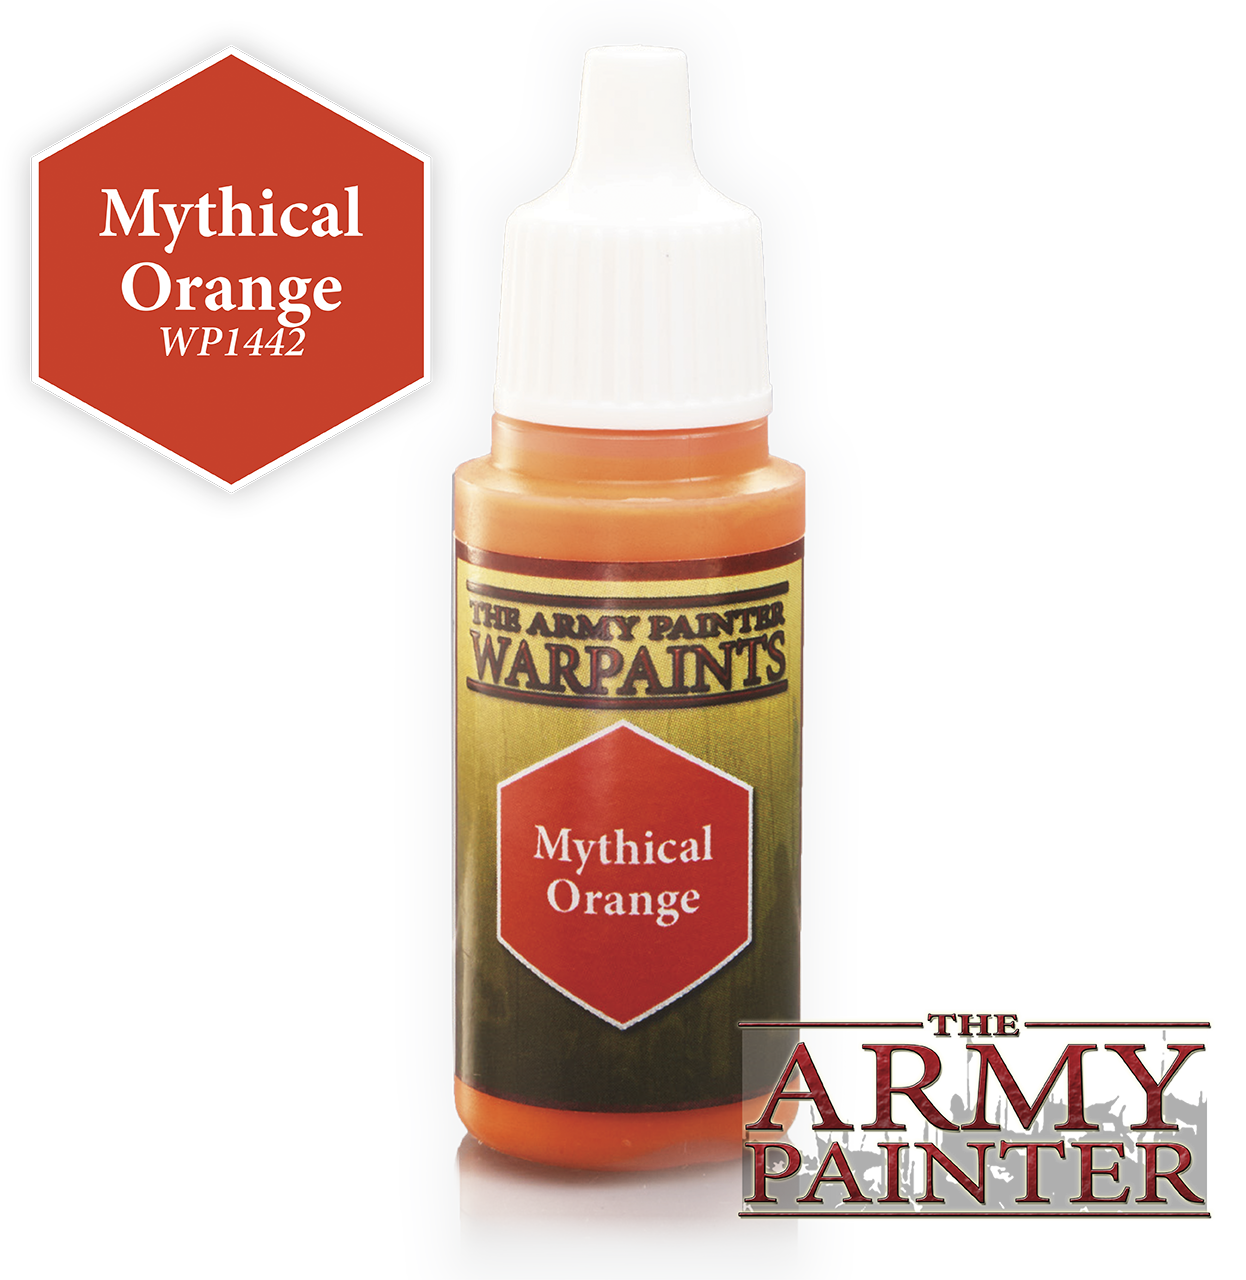 The ARMY PAINTER: Acrylics Warpaint - Mythical Orange | Tacoma Games